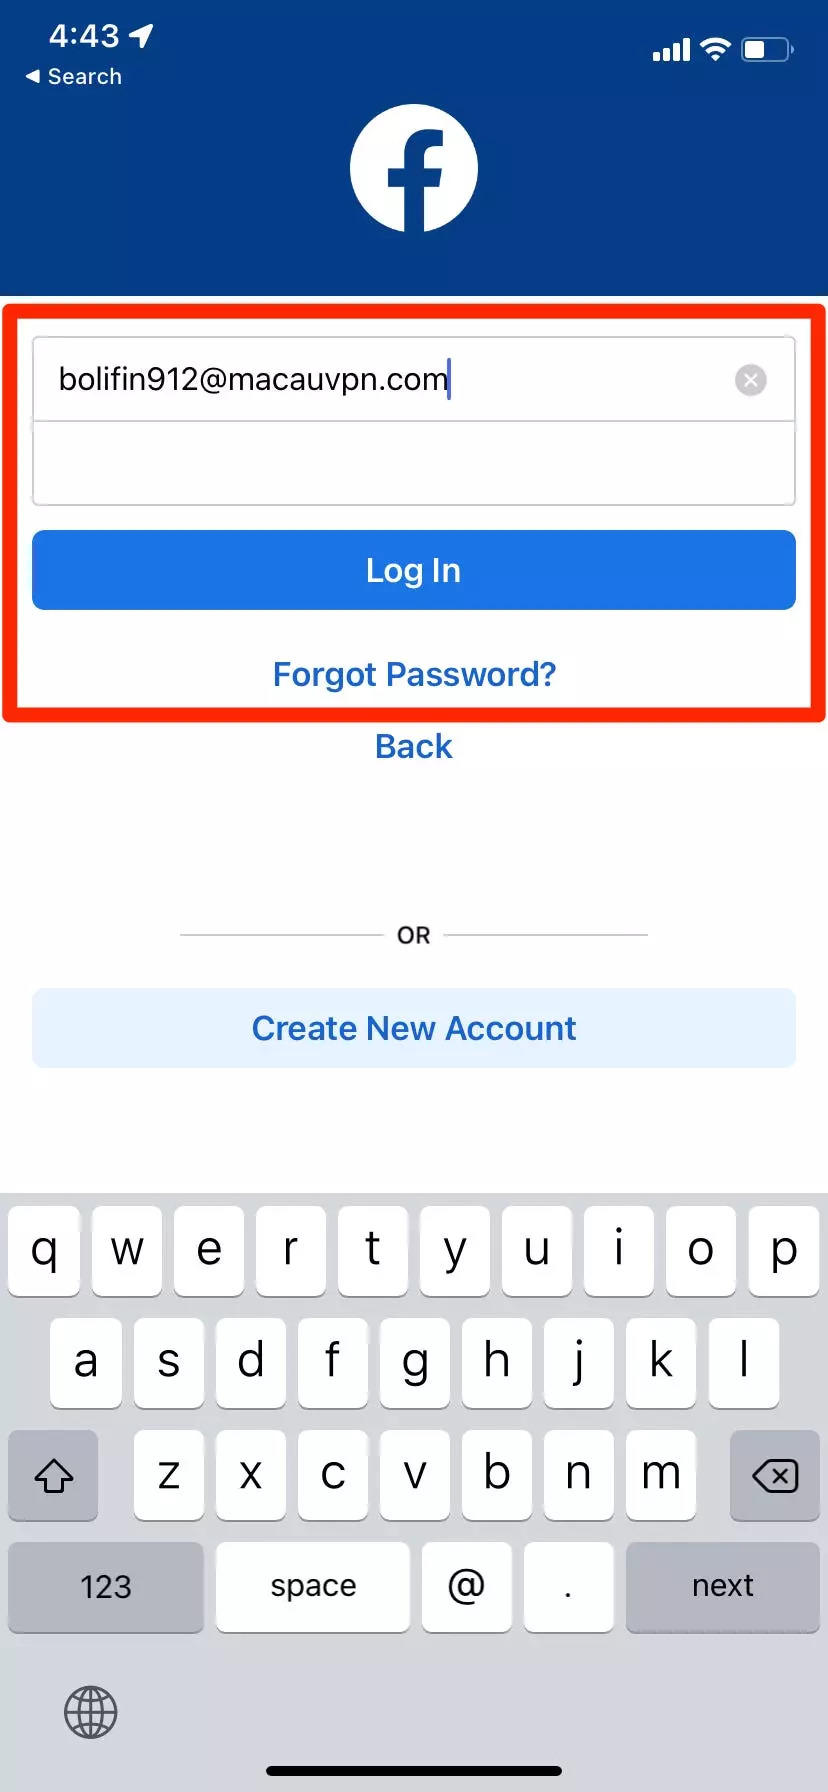 How to log into Facebook on a computer or mobile device, even if you don't  know your password, Business Insider México